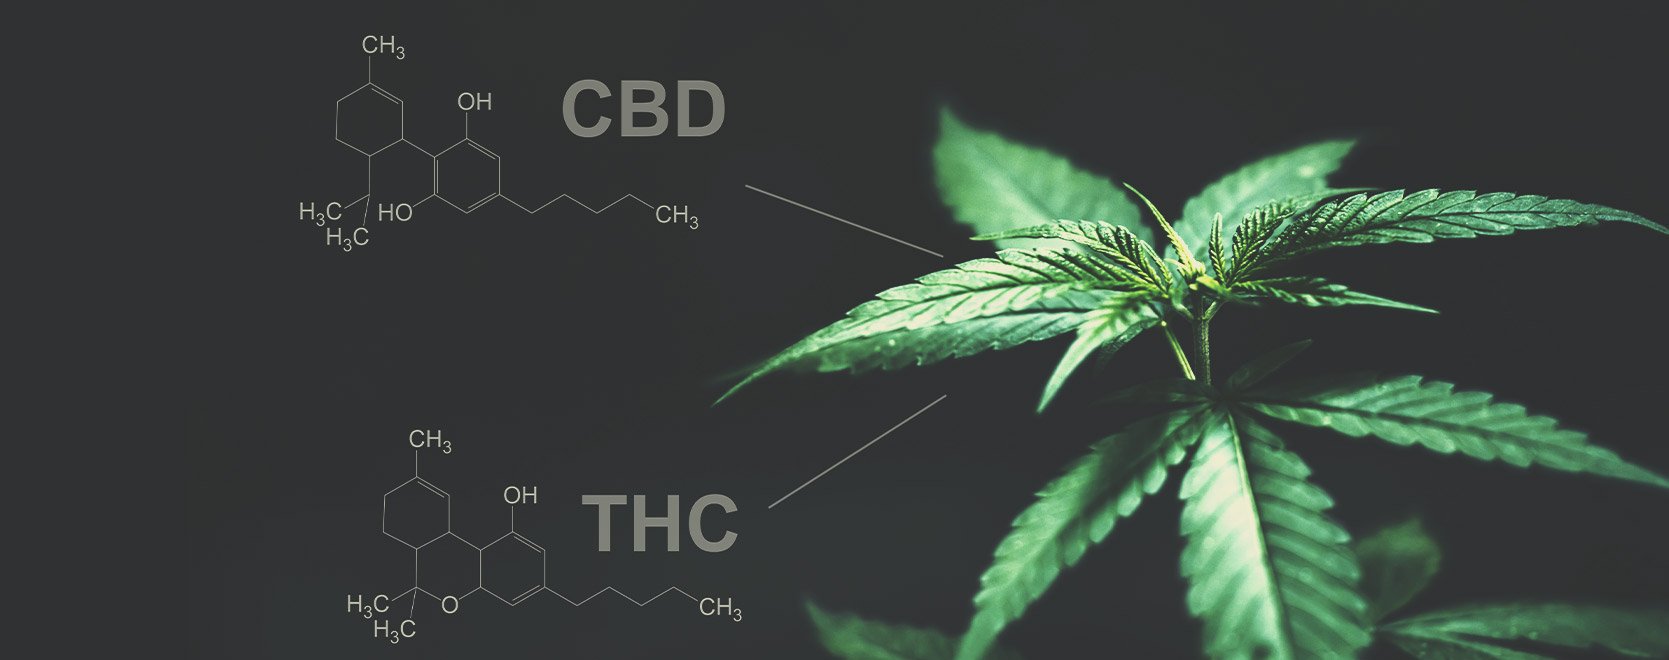 Is there any difference between THC and CBD in this regard?